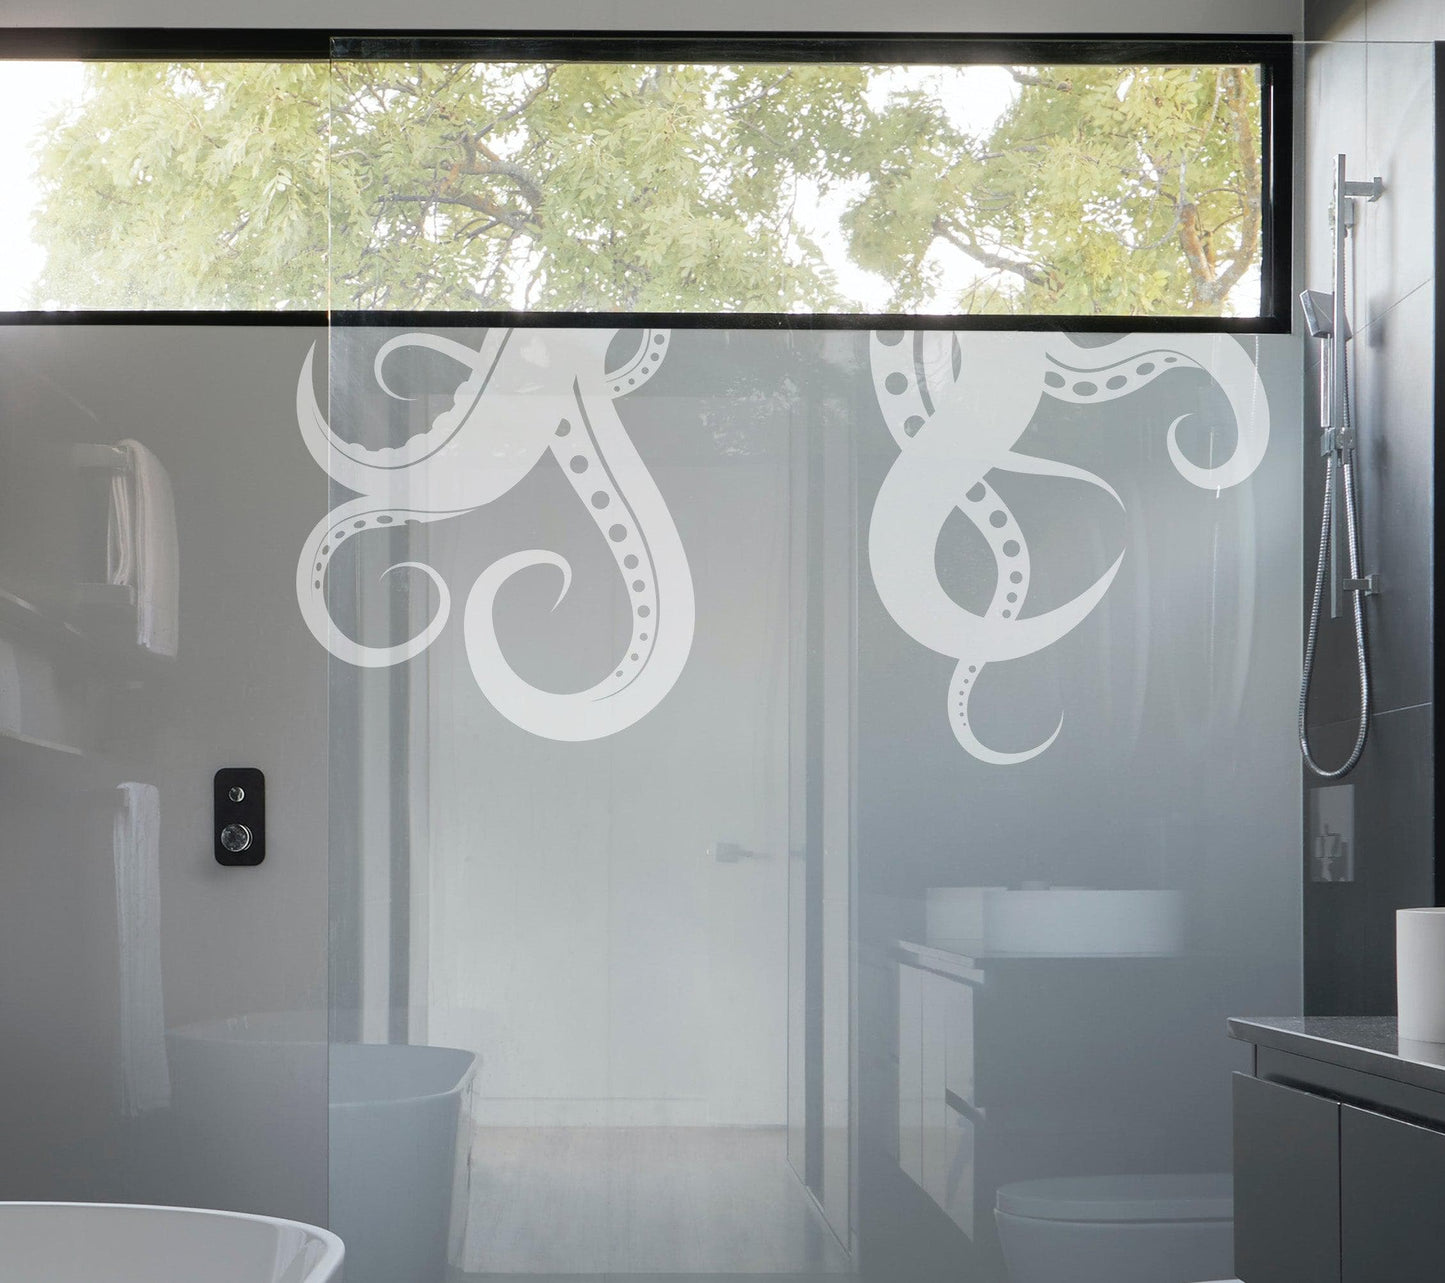 Octopus Tentacles Wall Decal. Perfect for Bathroom Home Decor. #OS_MB316